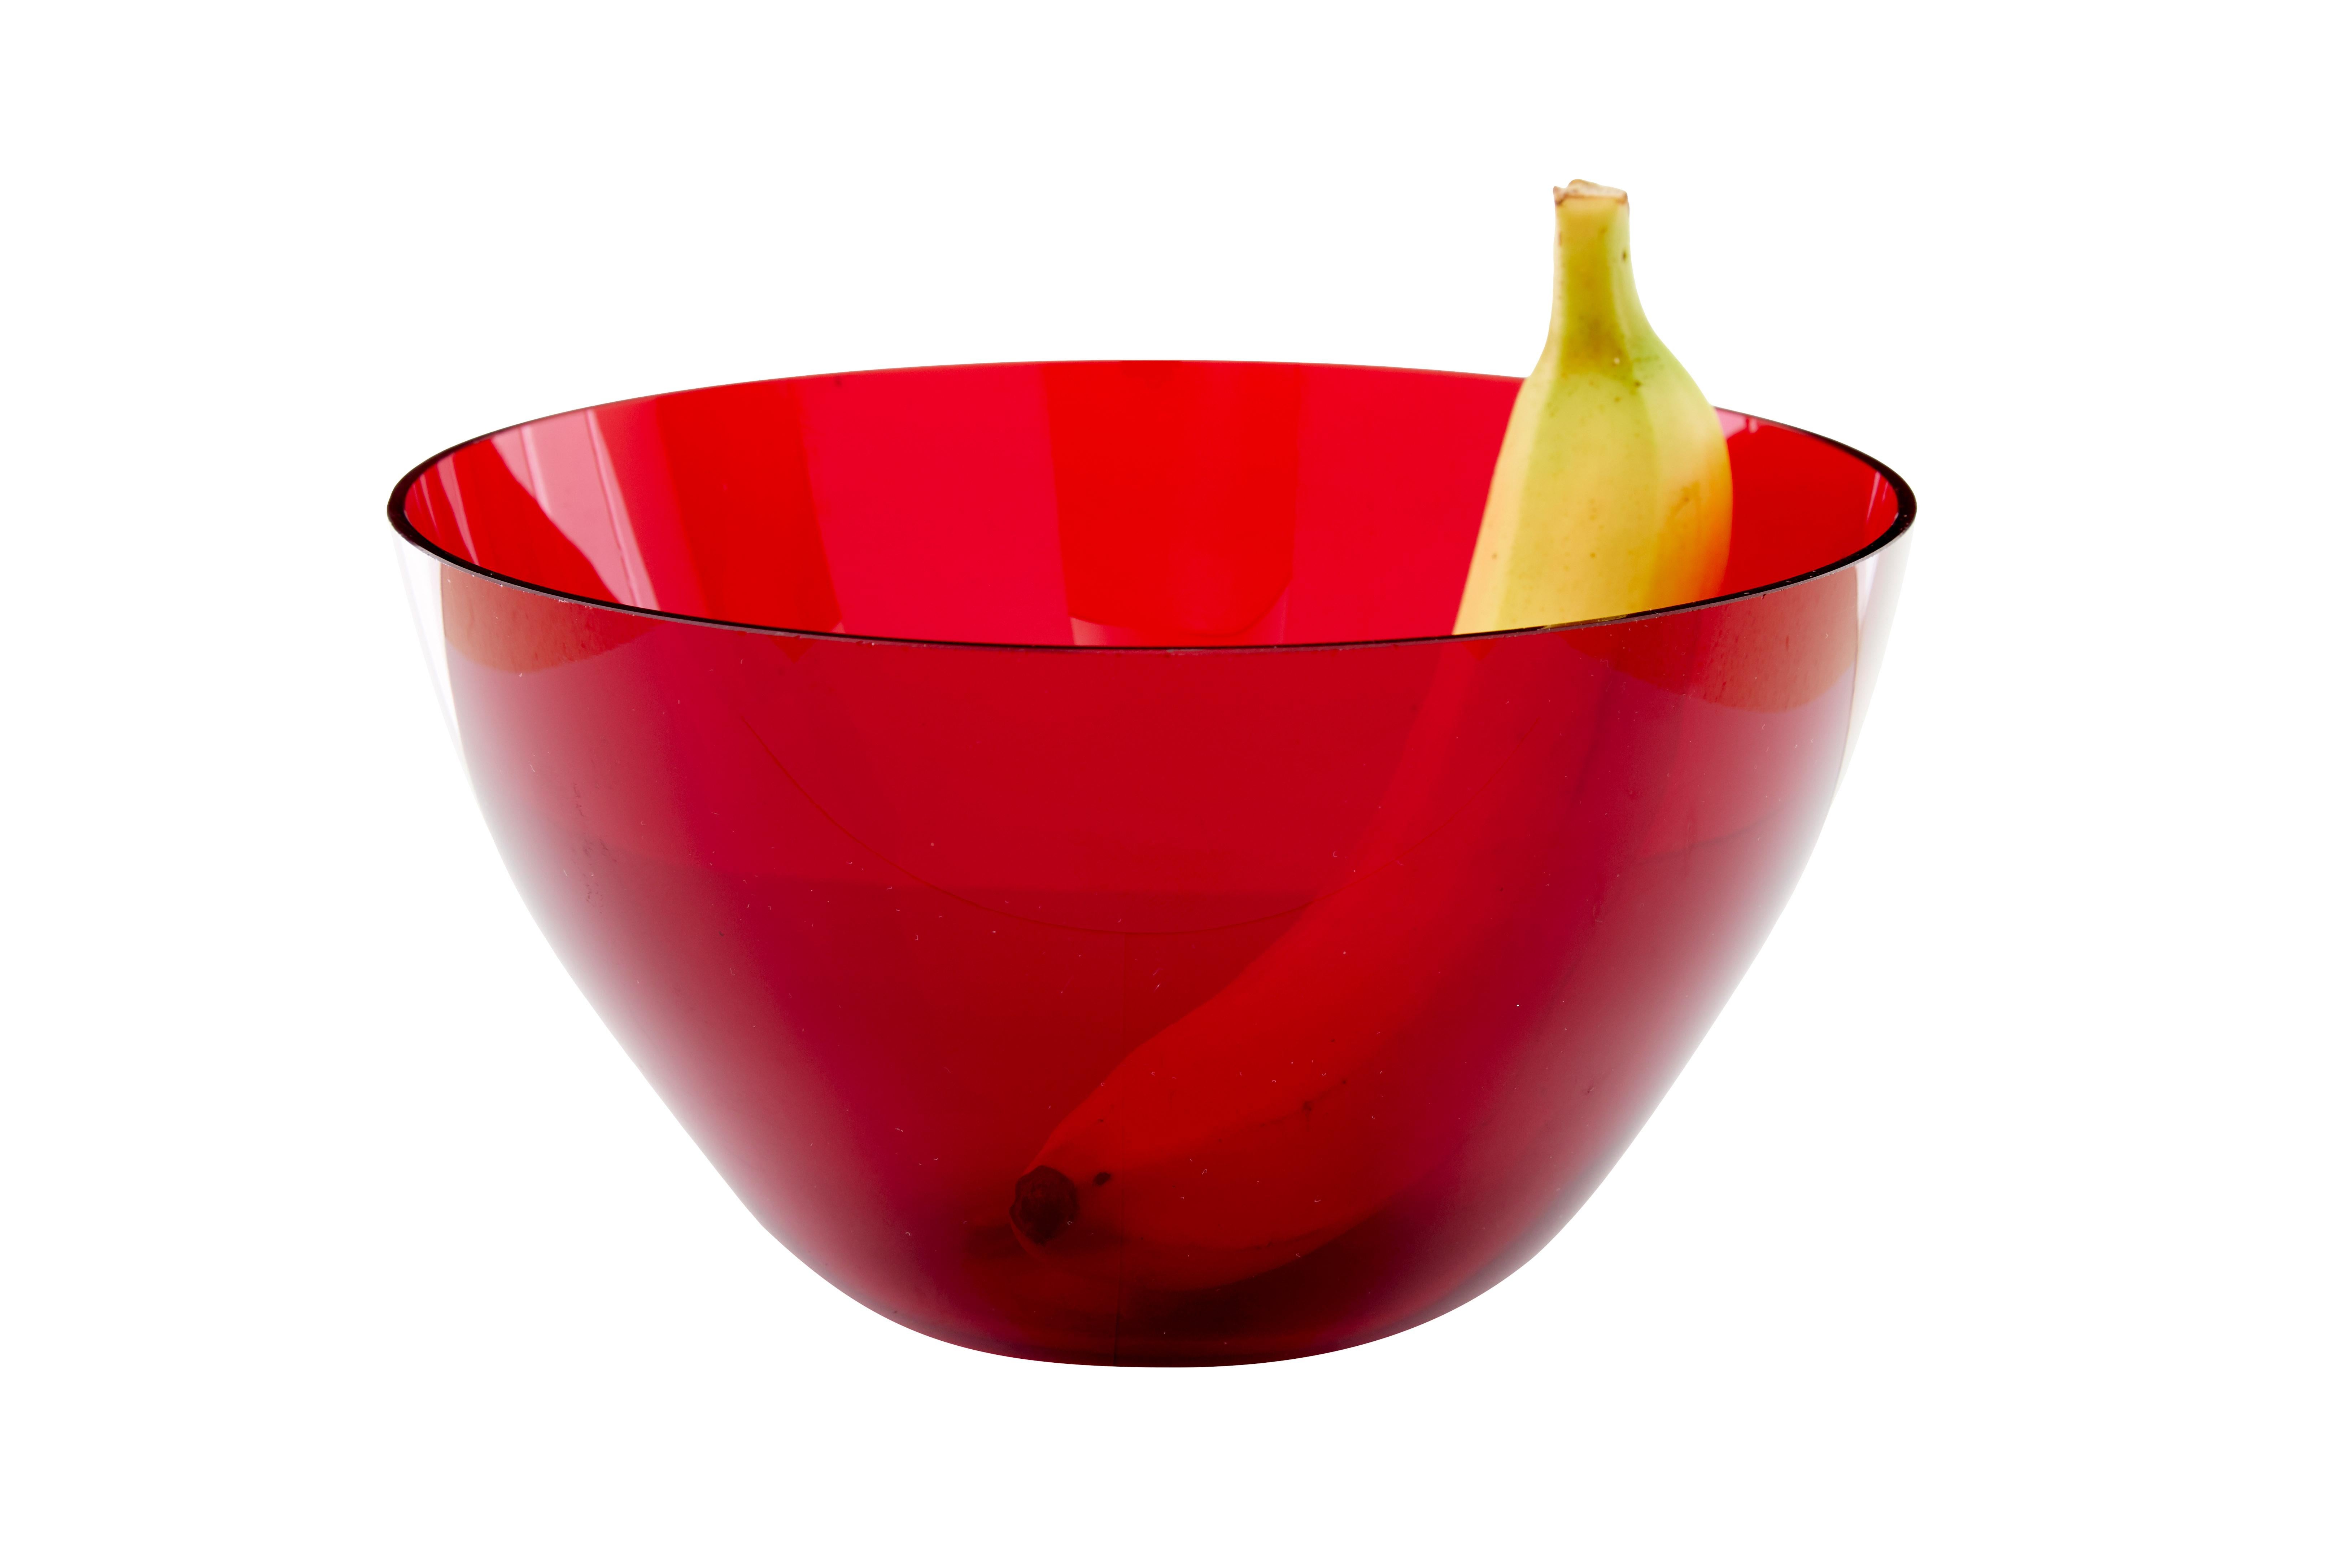 Mid century red glass fruit bowl by Monica Bratt circa 1950.

Monica bratt (1913-1961) was a Swedish artist who worked mainly in glassware at the reijmyre glassworks.

Good quality bowl in a deep red, ideal for use with fruit or display.